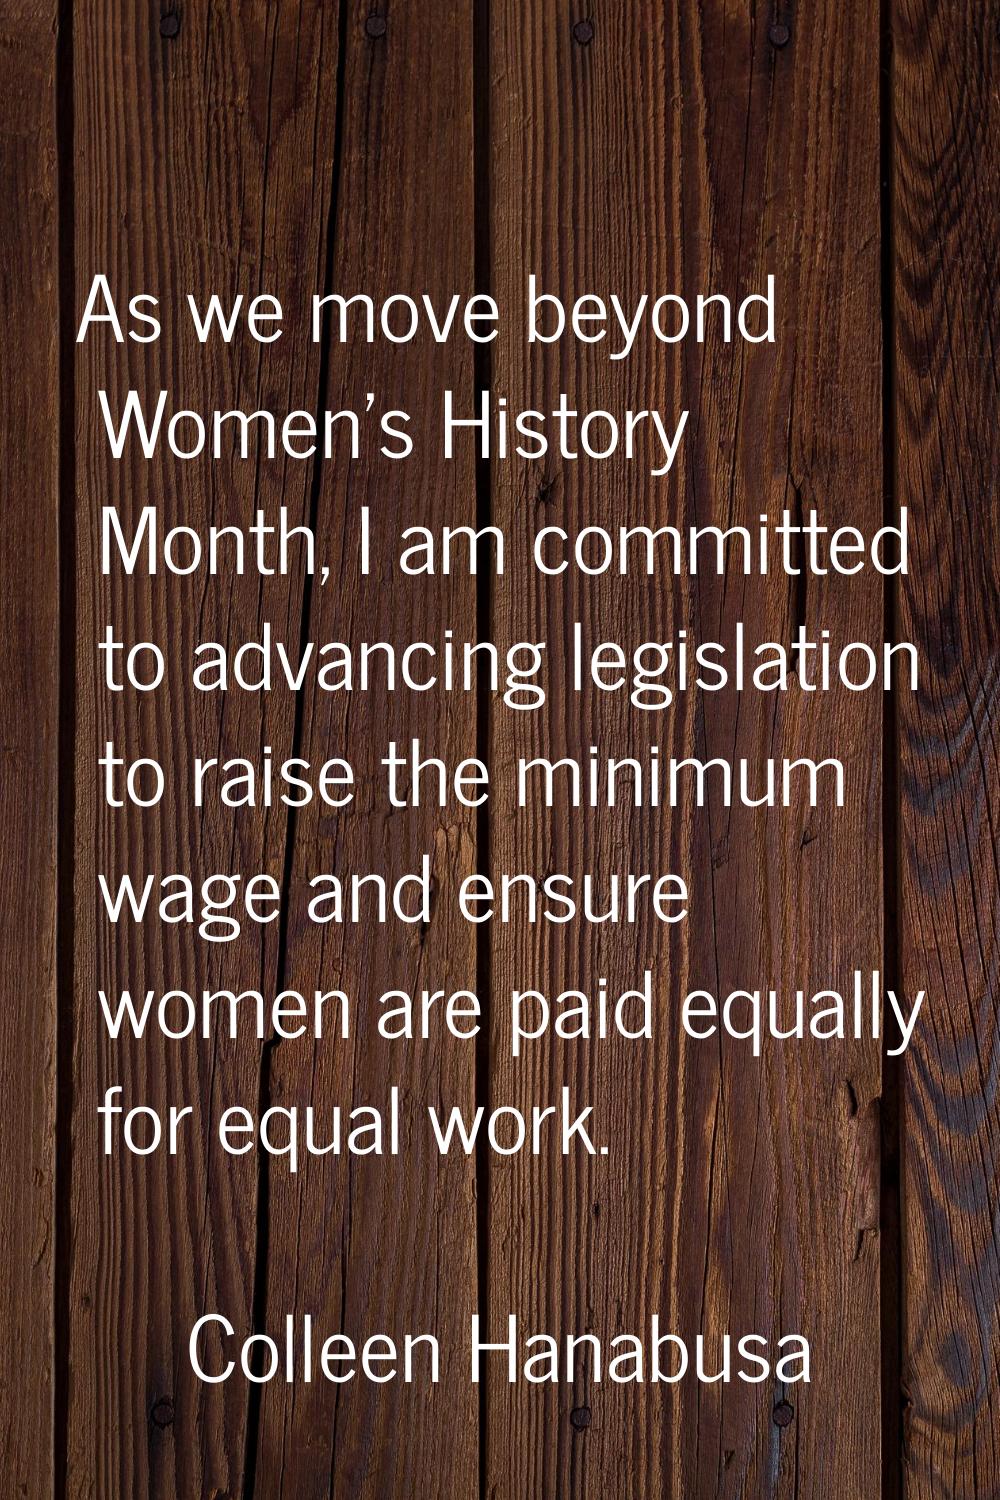 As we move beyond Women's History Month, I am committed to advancing legislation to raise the minim